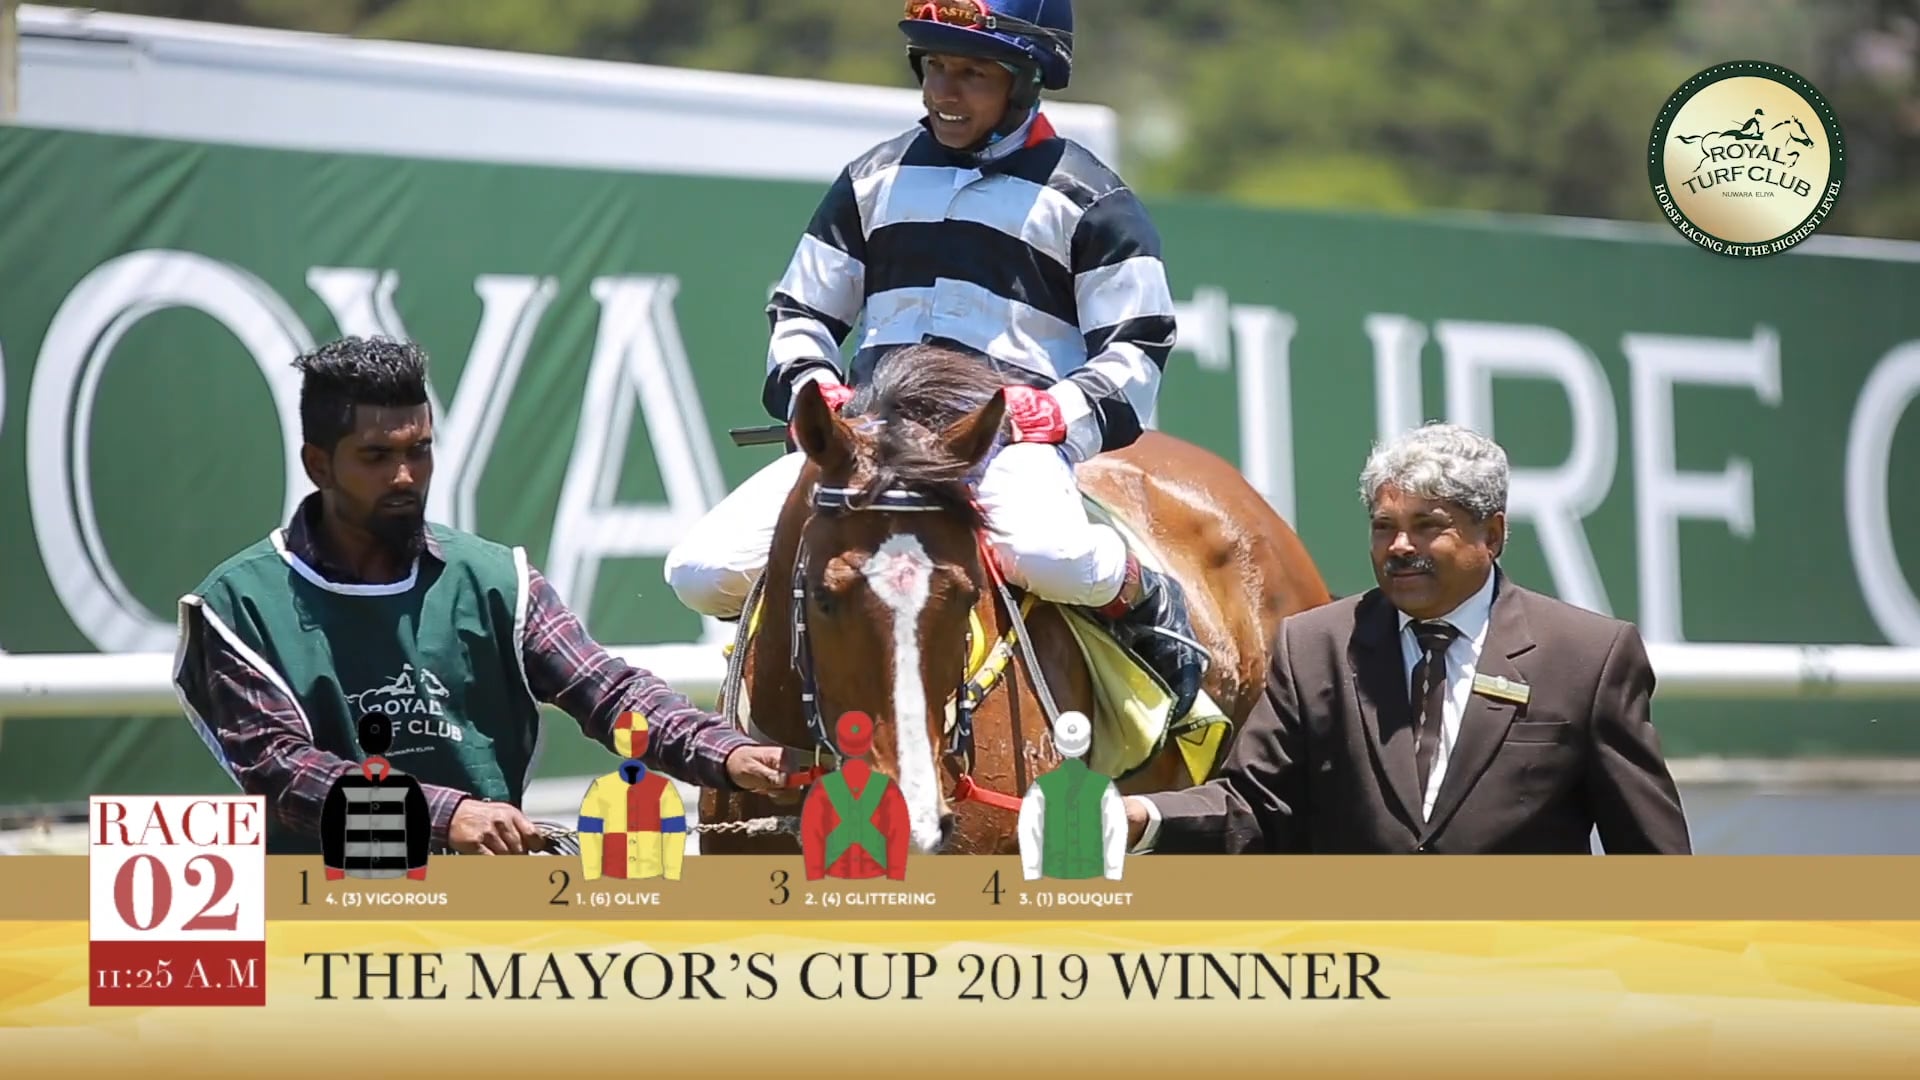 The Mayor's Cup 2019